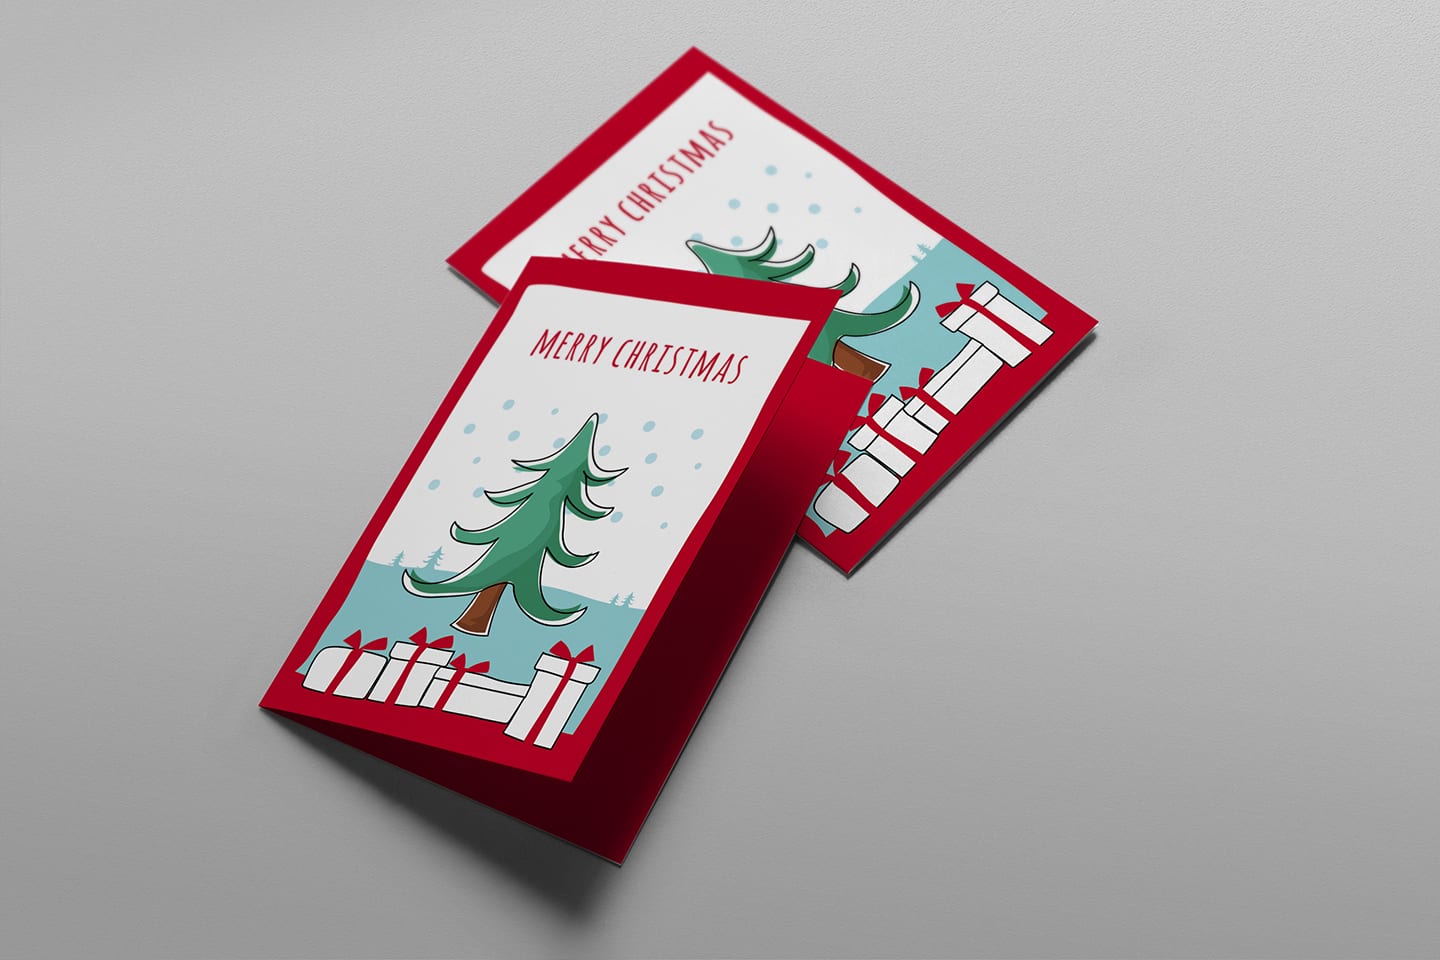 Free Christmas Card Templates for Photoshop & Illustrator Within Print Your Own Christmas Cards Templates